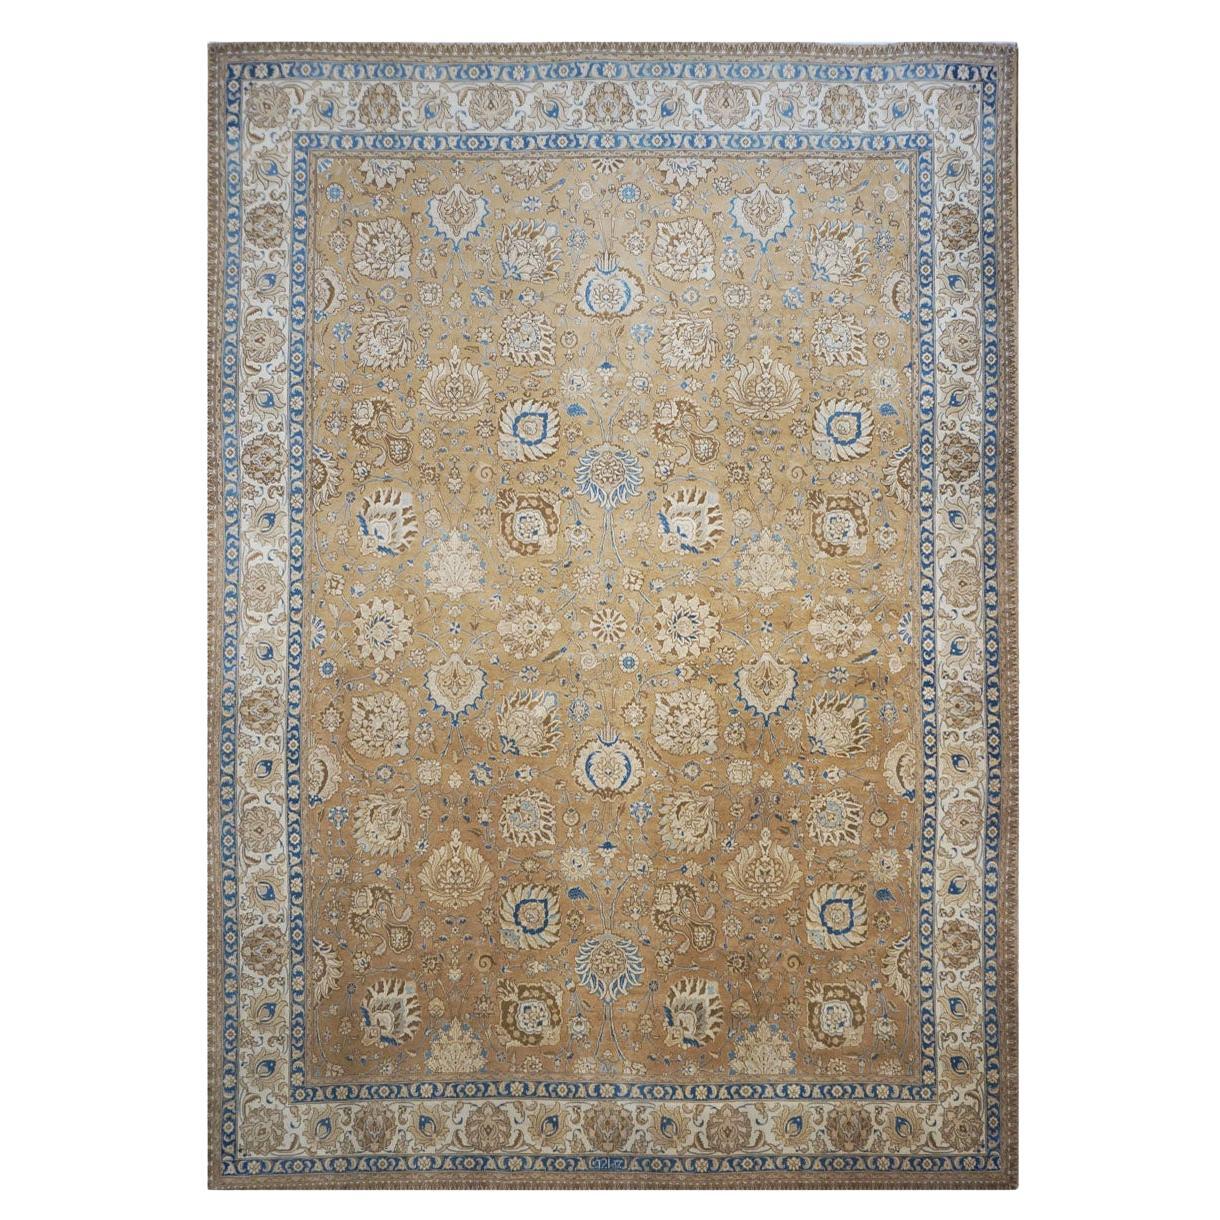 Antique 1940s Persian Tabriz 11x15 Brown, Tan, & Blue Handmade Area Rug For Sale